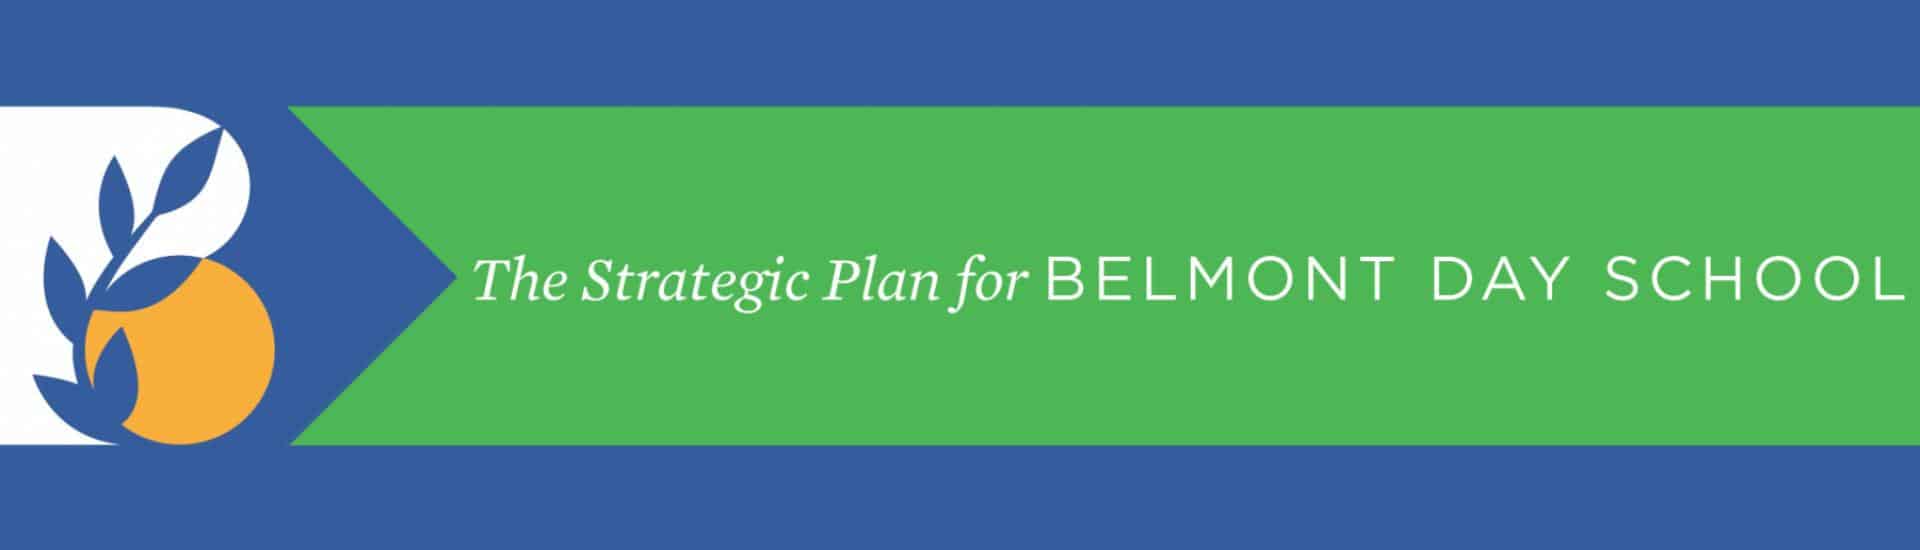 The Strategic Plan for Belmont Day School banner text